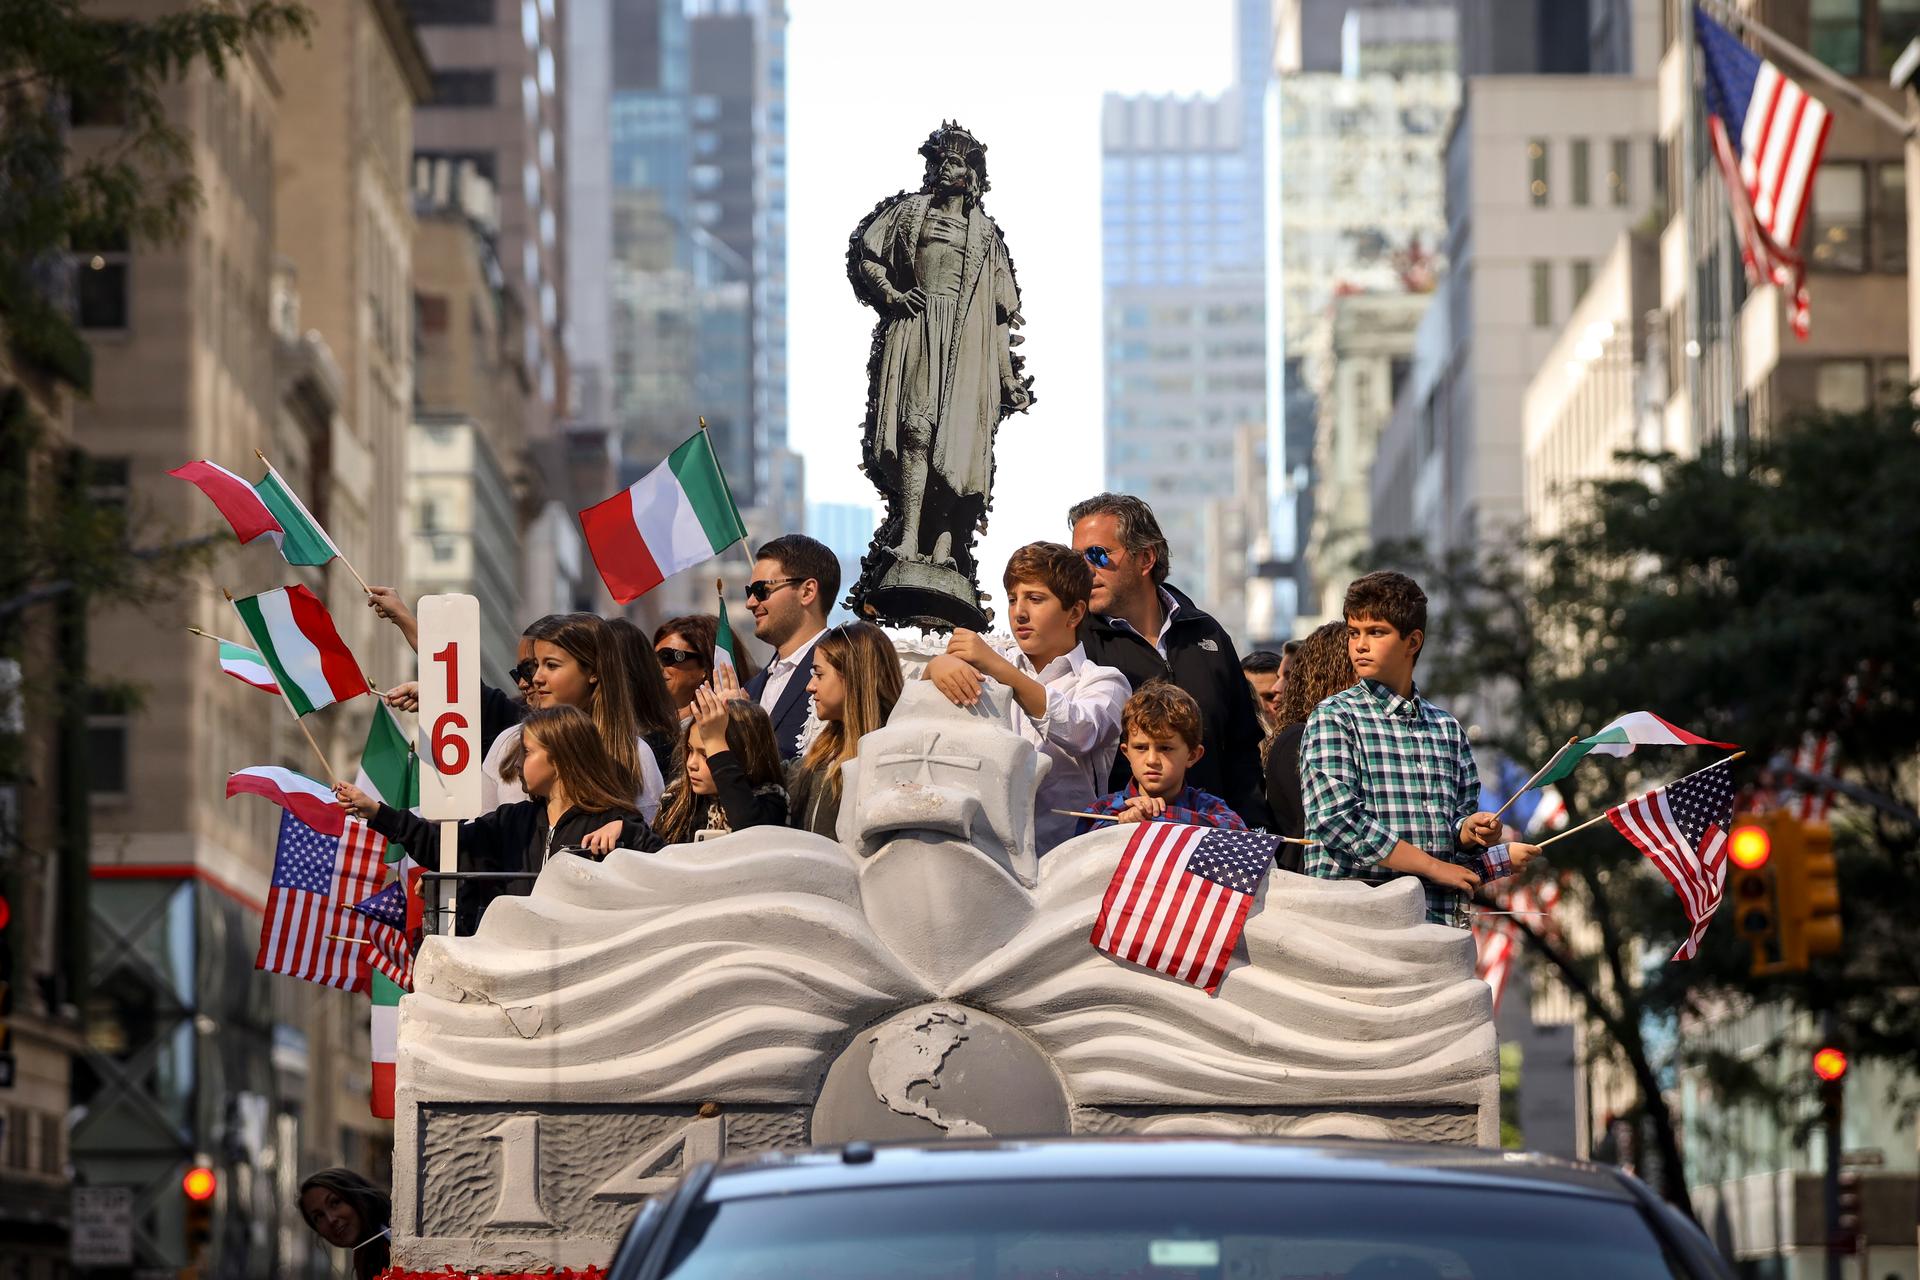 Italian Americans celebrating during a Christopher Columbus Day parade. 